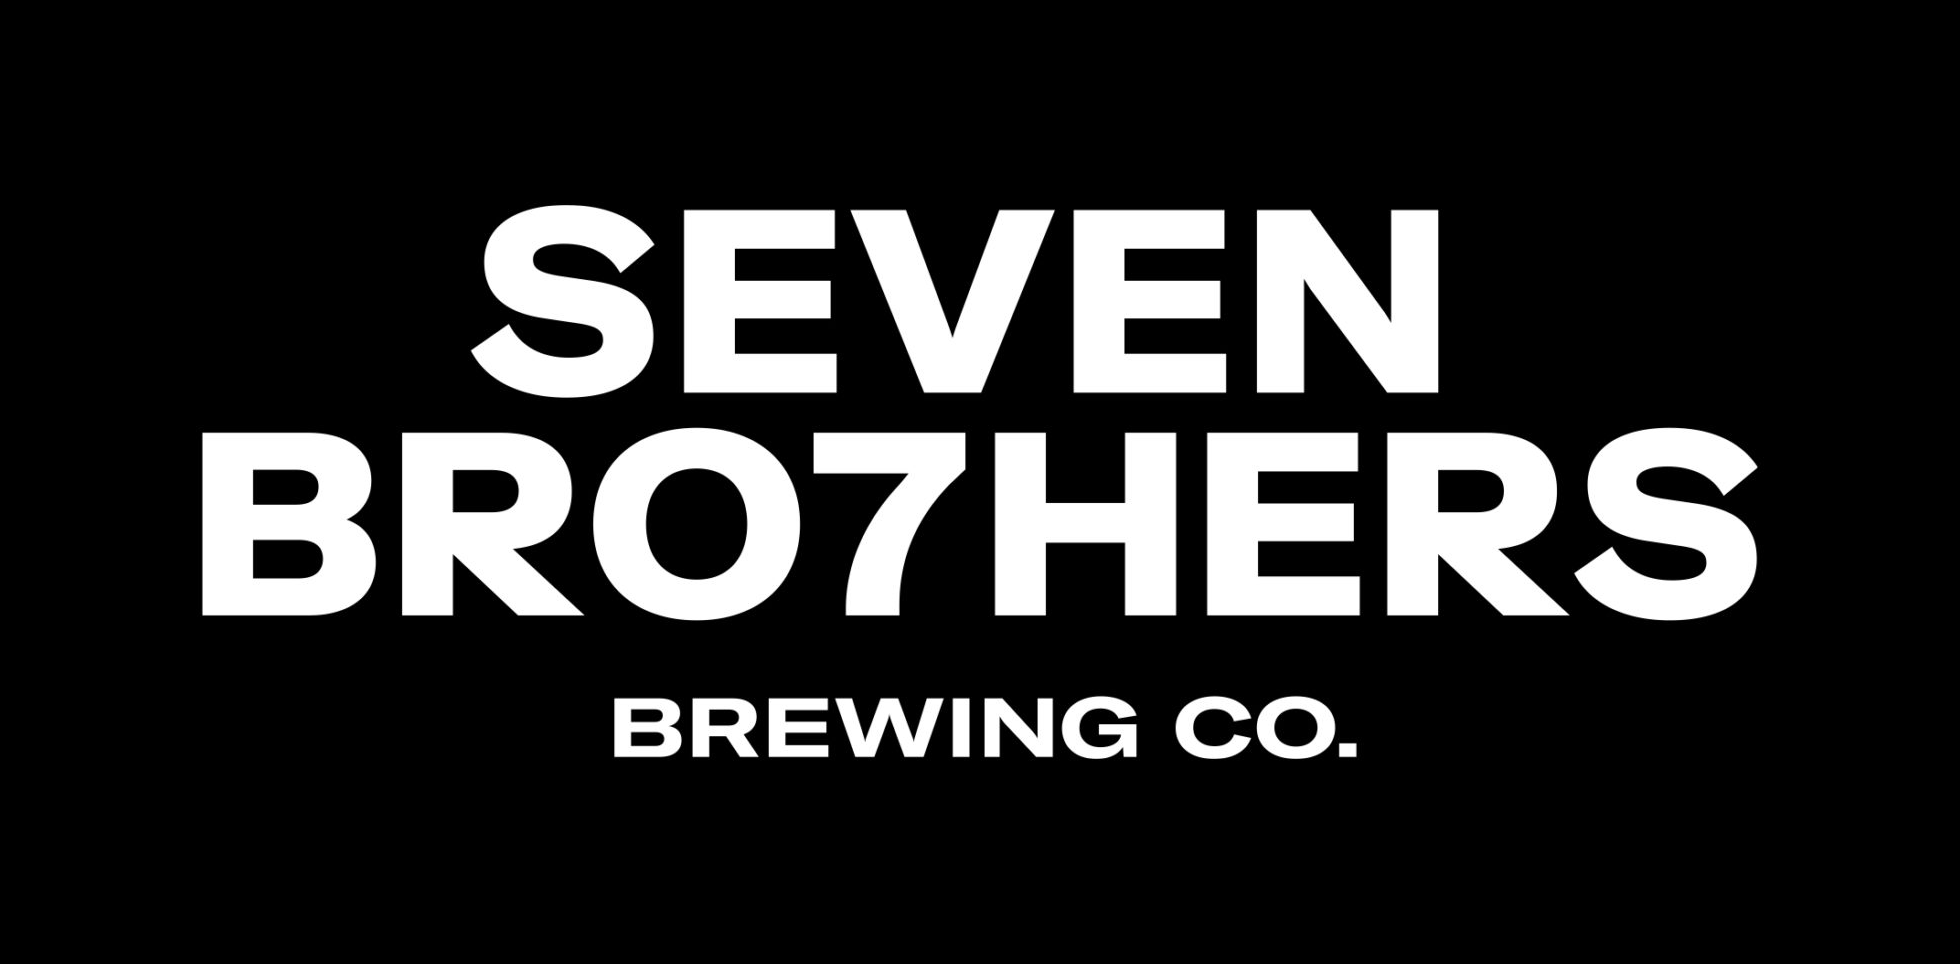 New Logo and Packaging for Seven Bro7hers by Creative Spark